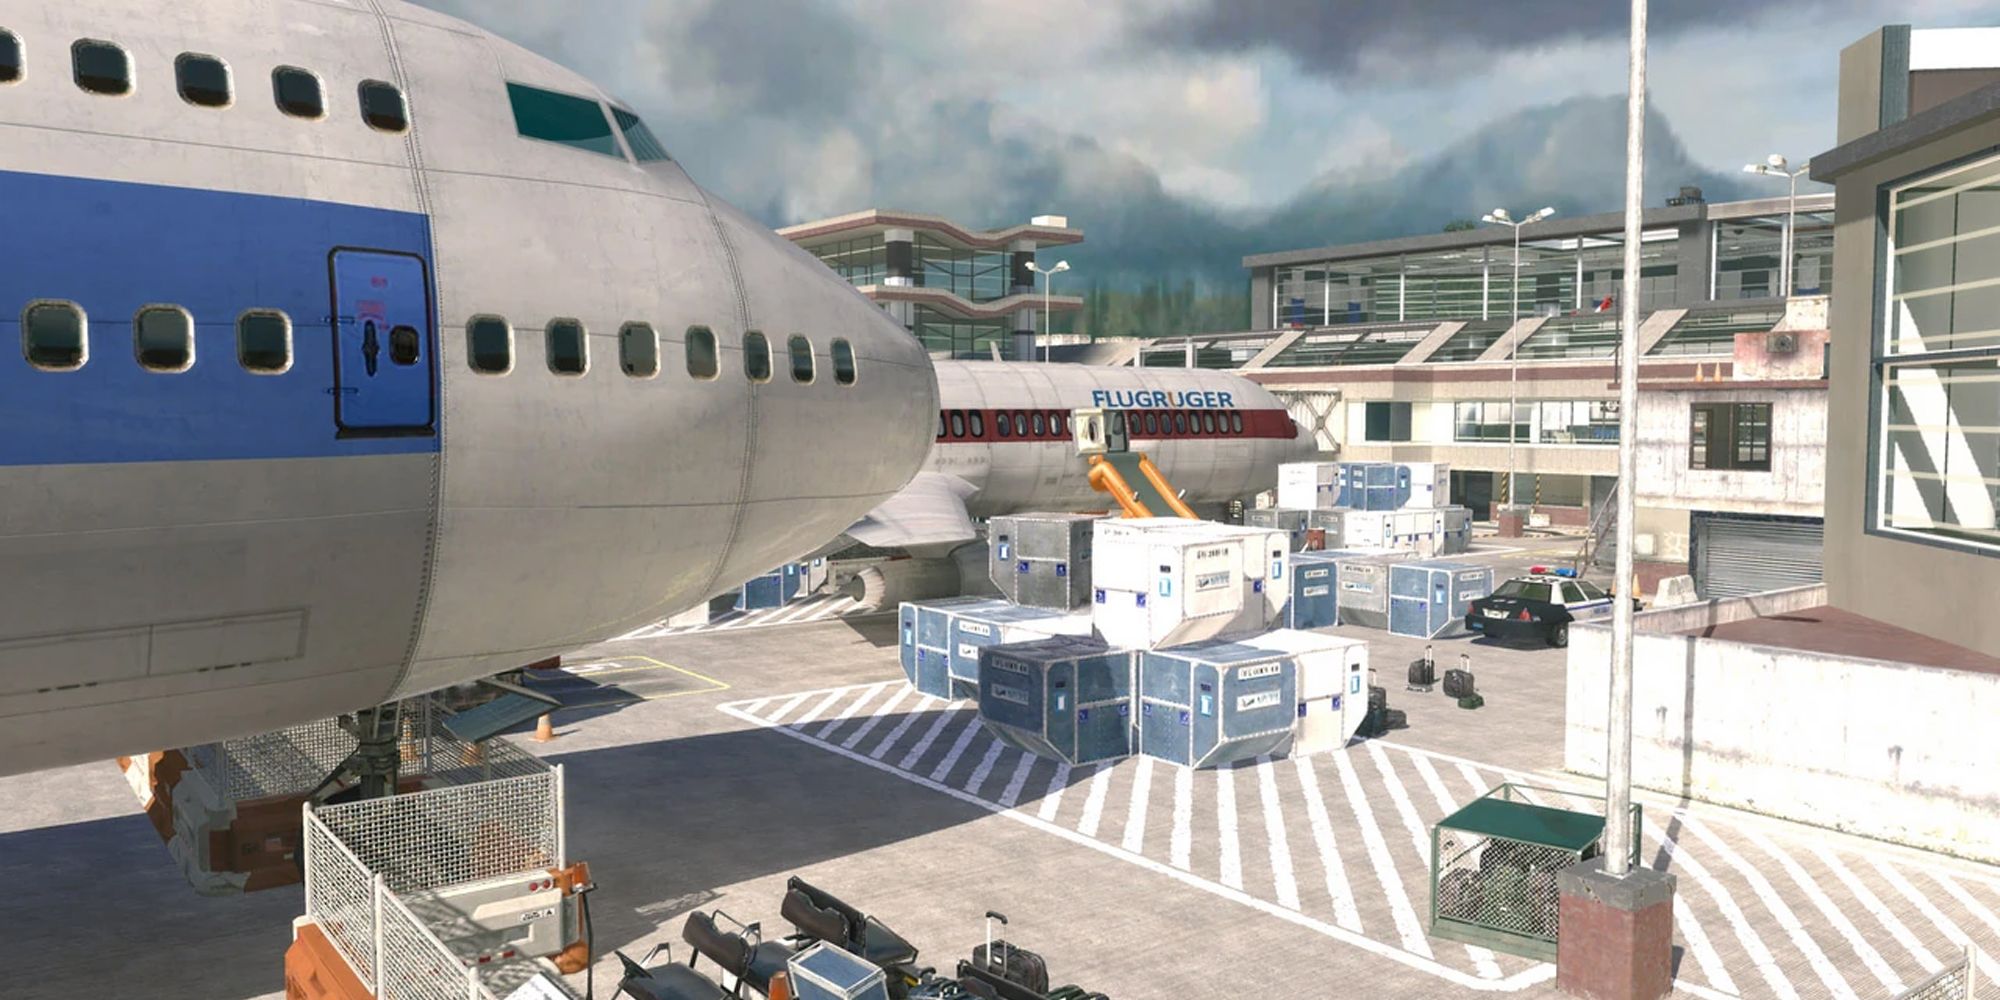 Call of Duty: Modern Warfare 2 Terminal map screenshot, showing two planes at an airport surrounded by cargo